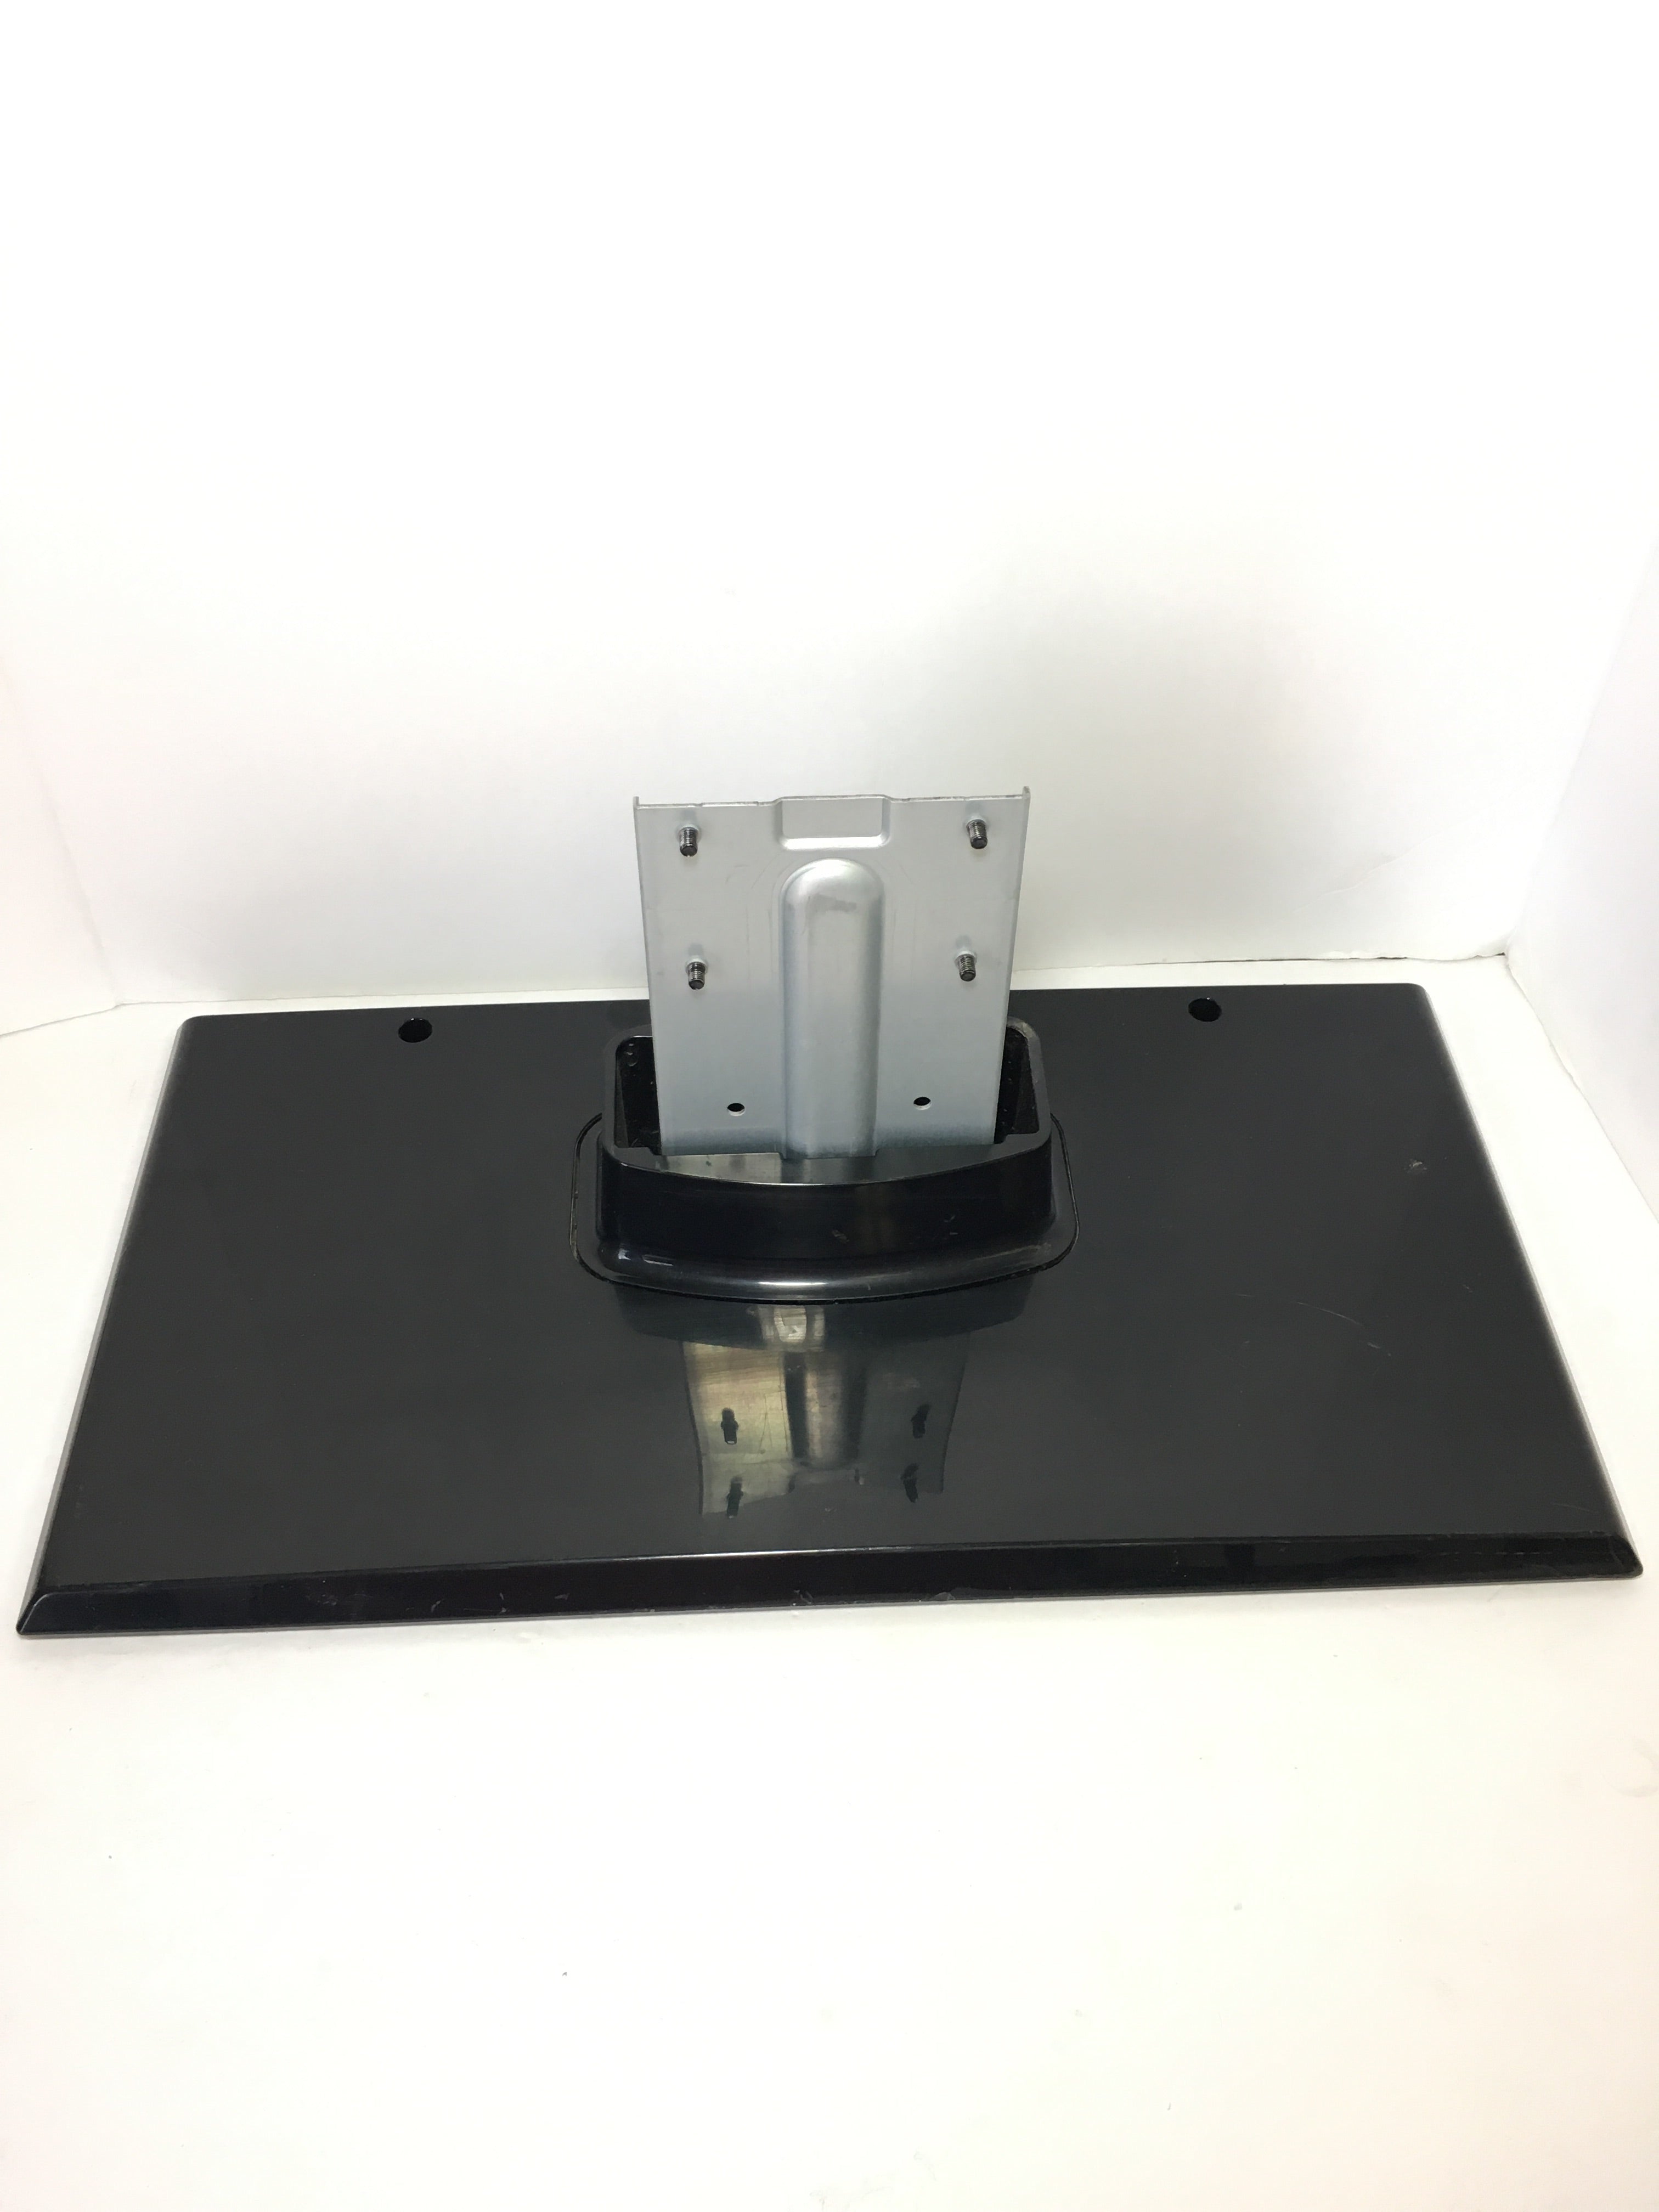 Emerson LC401EM2F TV Stand/Base